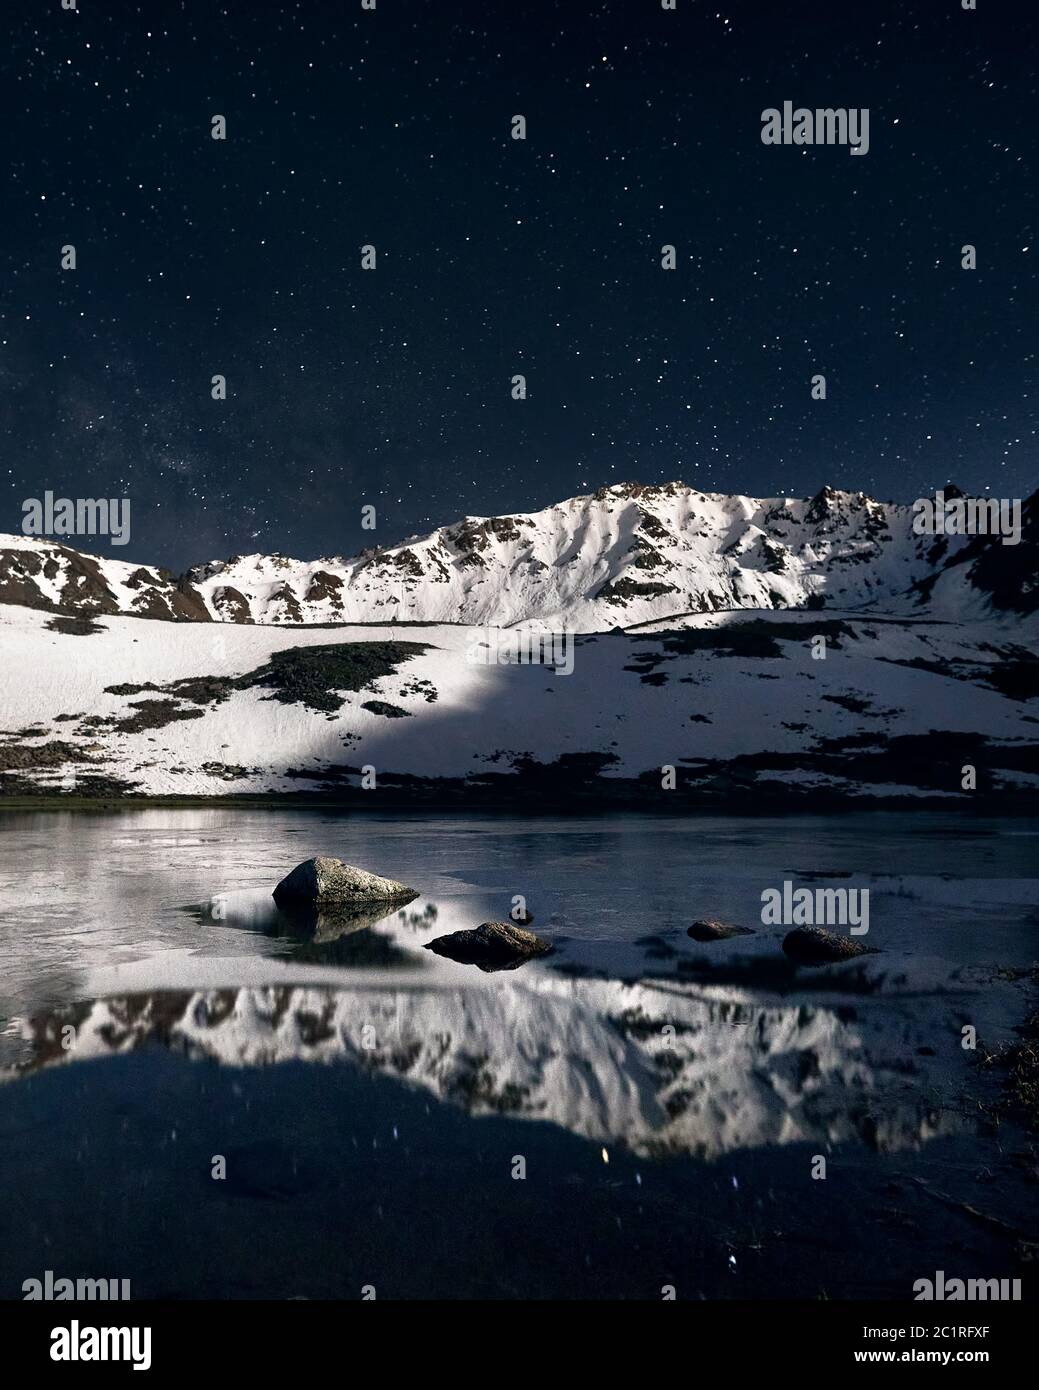 Beautiful scenery of white peak mountains and lake at foreground against night sky full of stars. Astrophotography and long exposure. Stock Photo